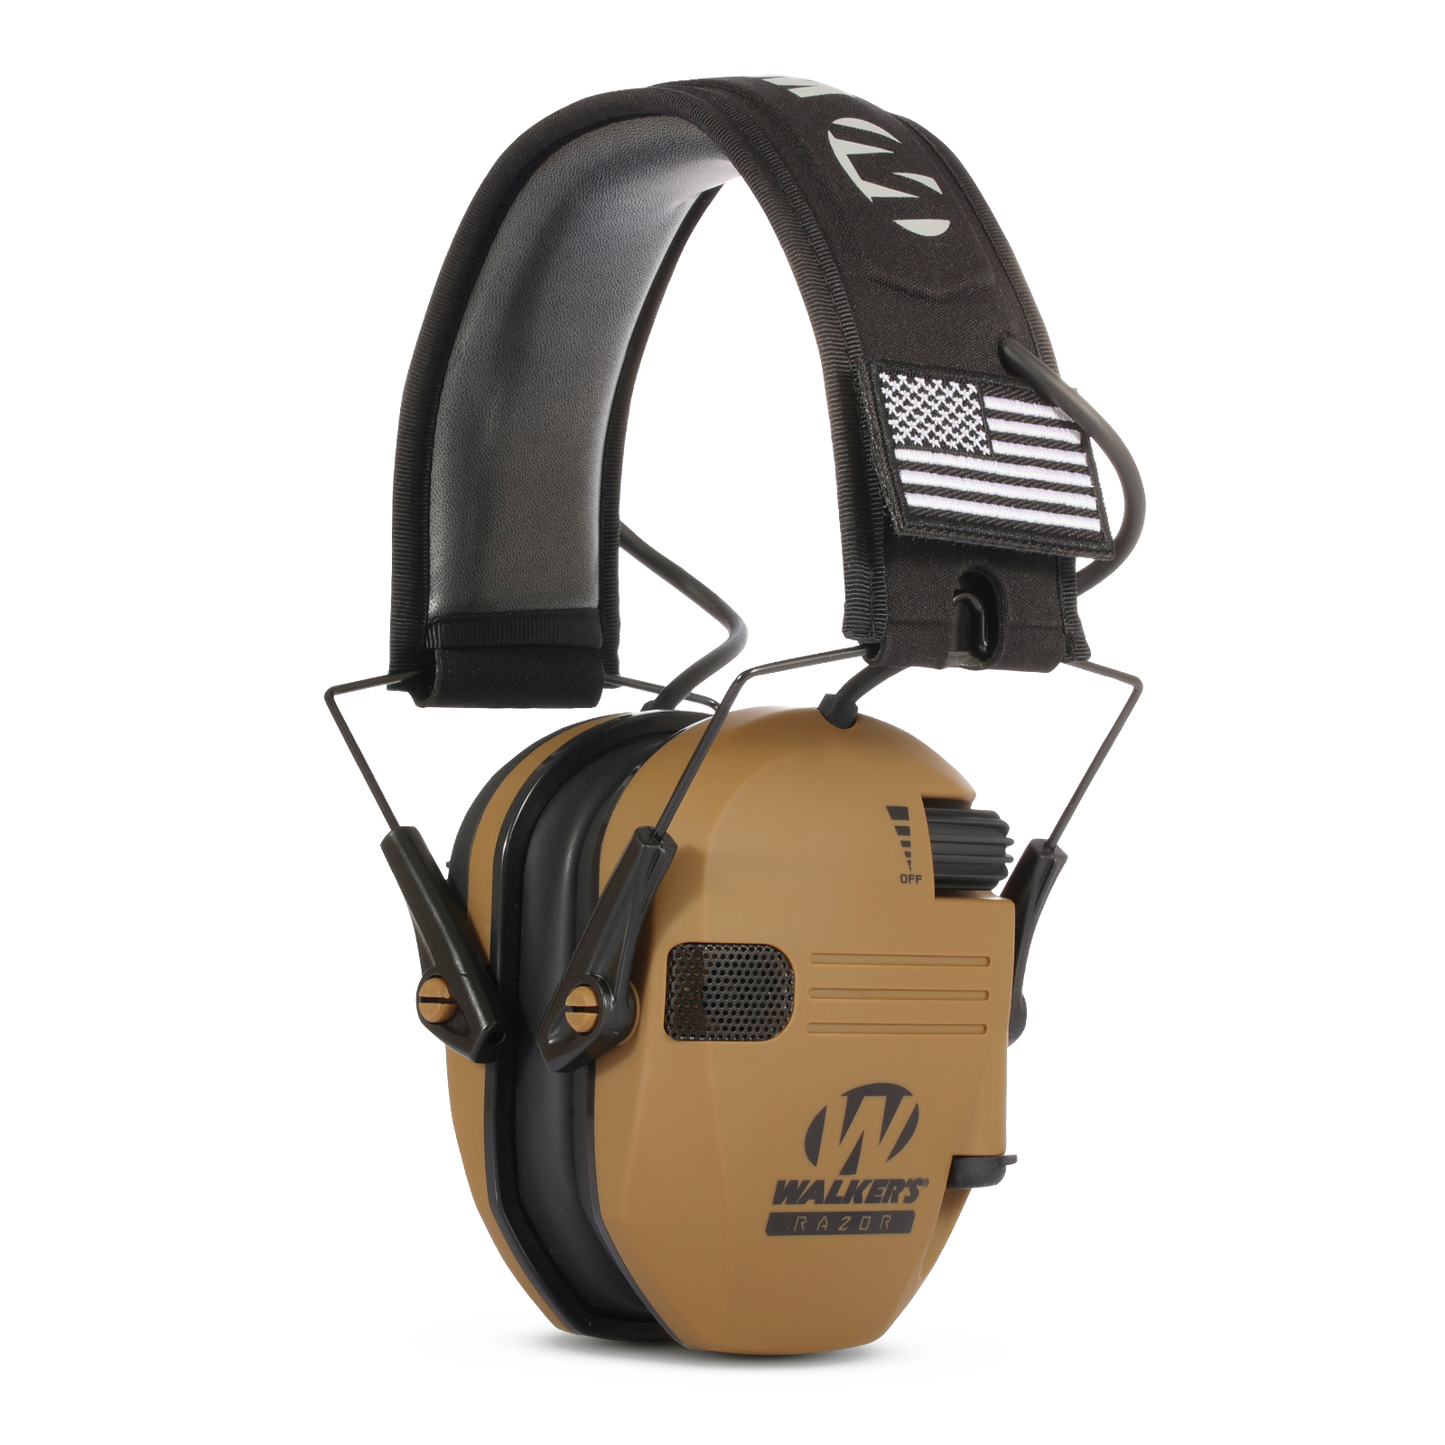 Noise Reduction Shooting Ear Protection Safety Earmuffs